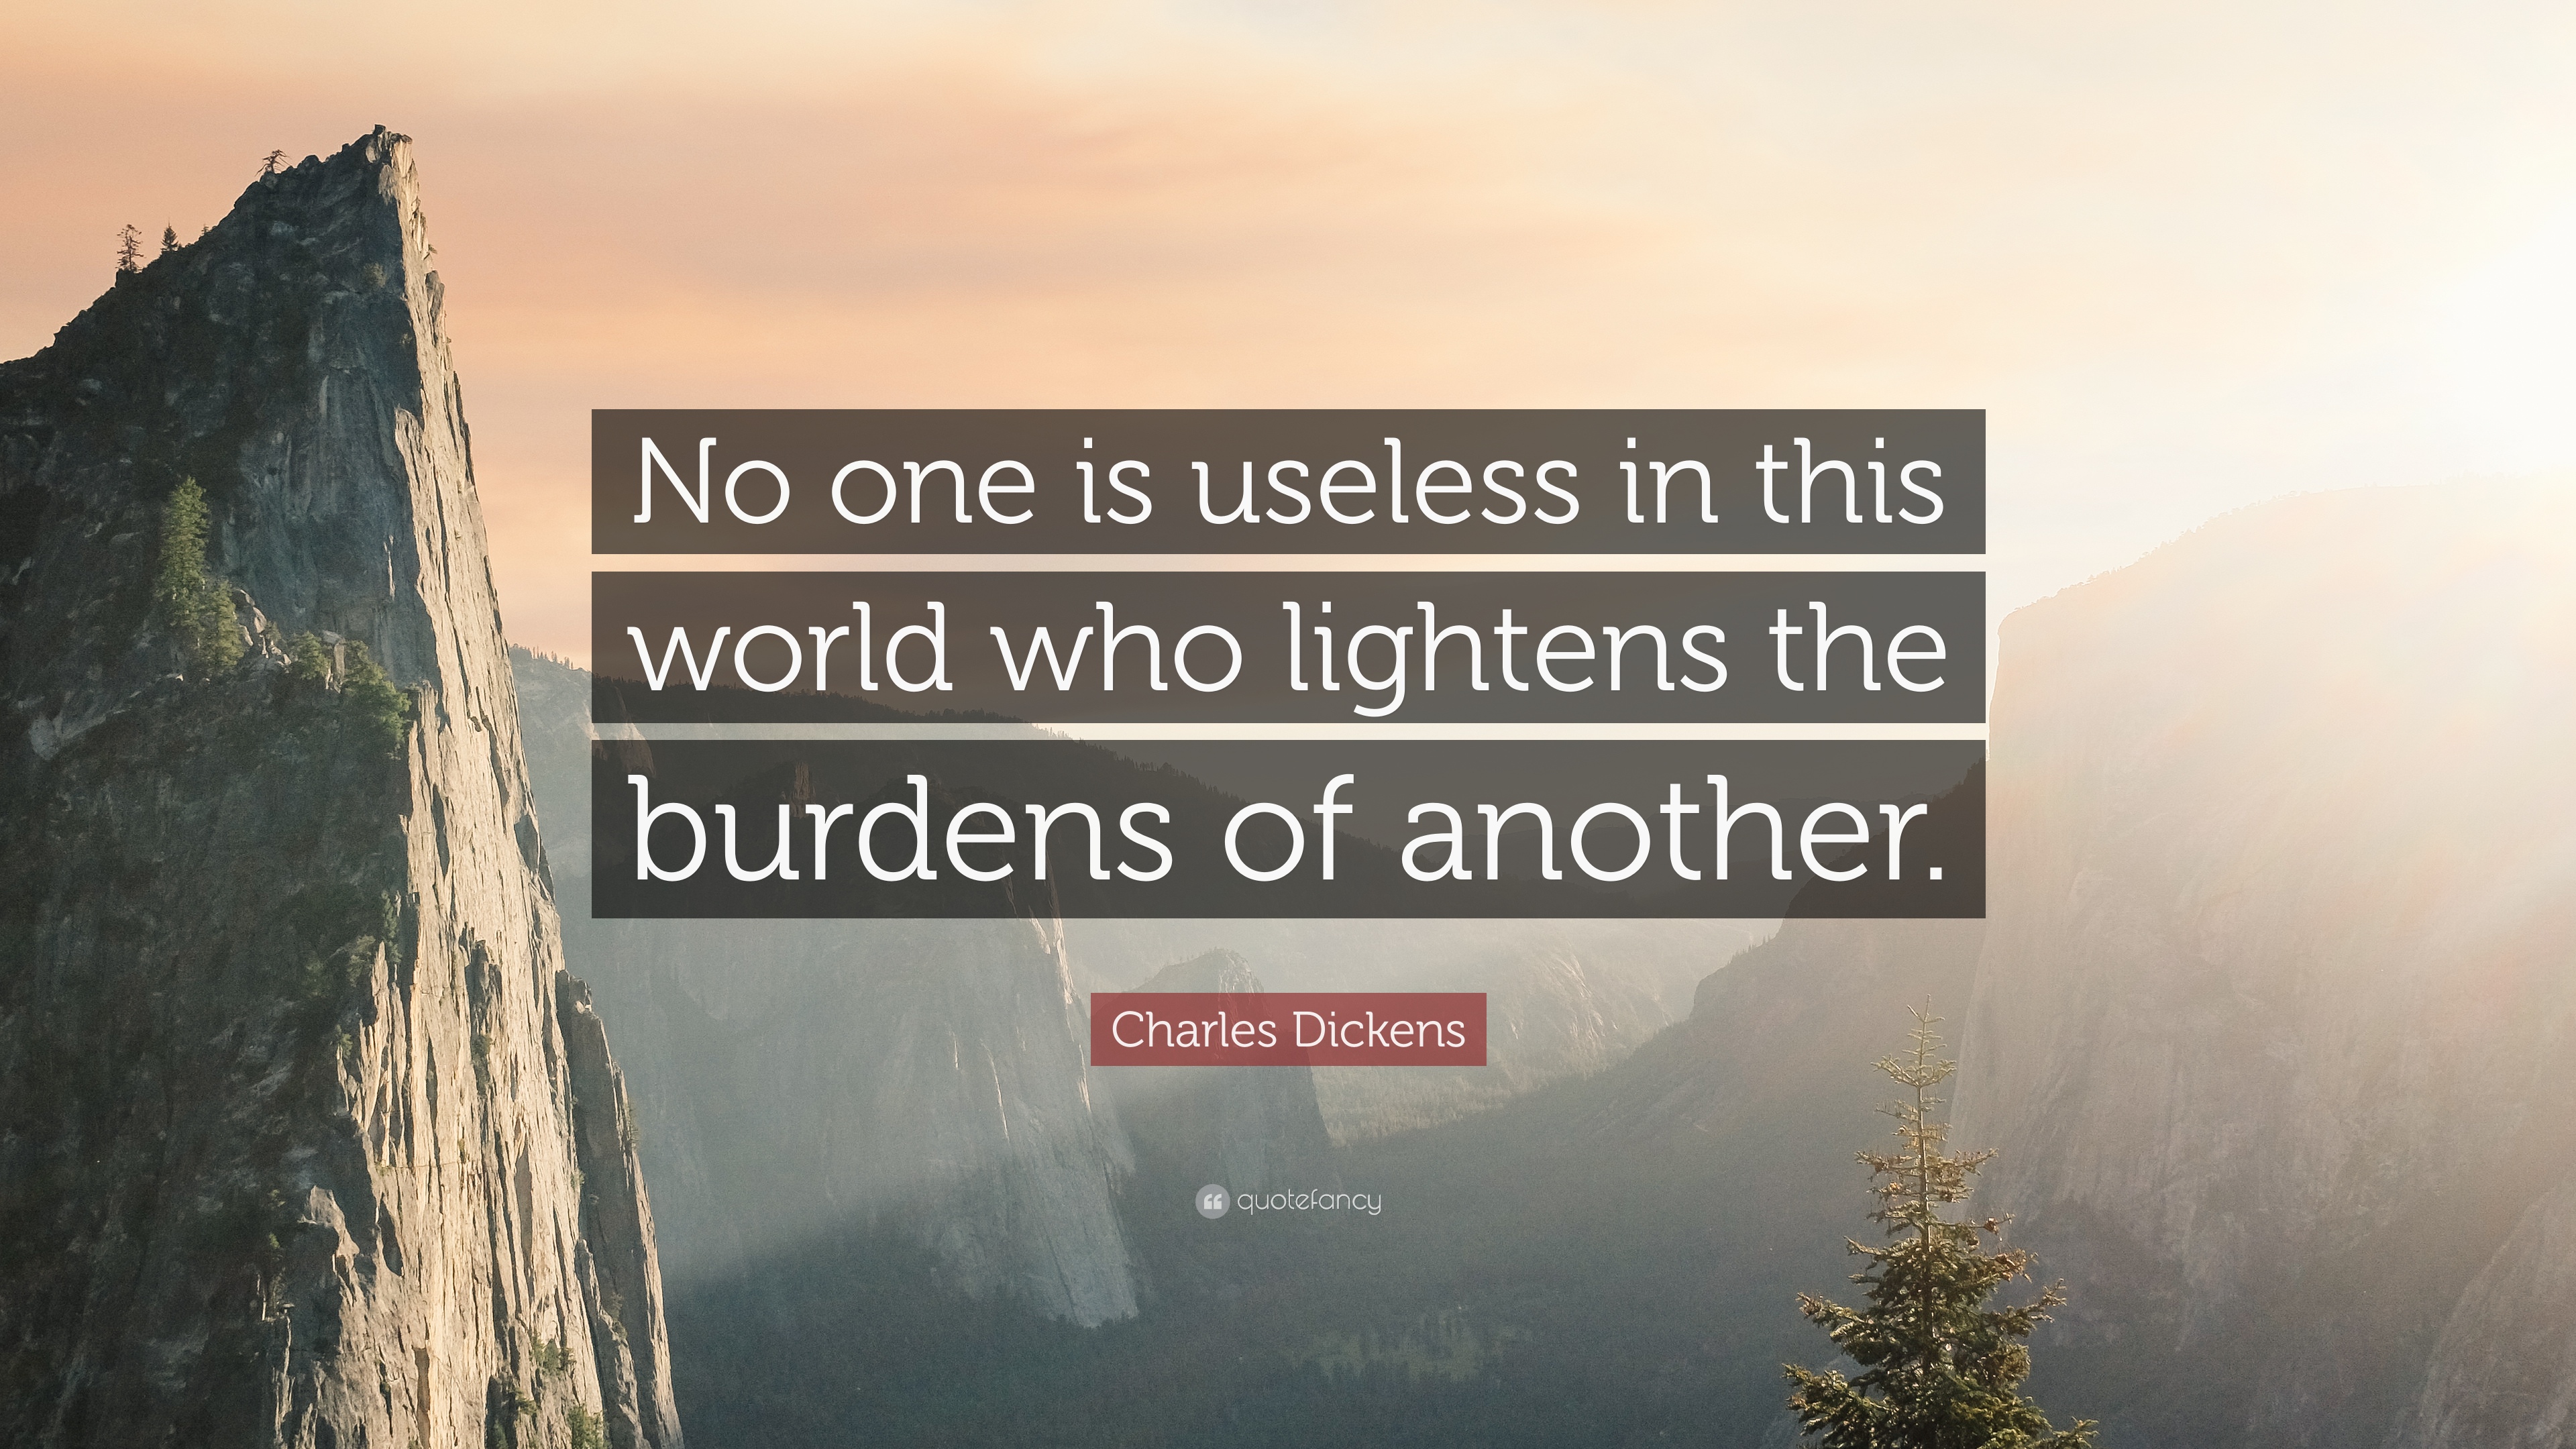 16696-charles-dickens-quote-no-one-is-useless-in-this-world-who-lightens